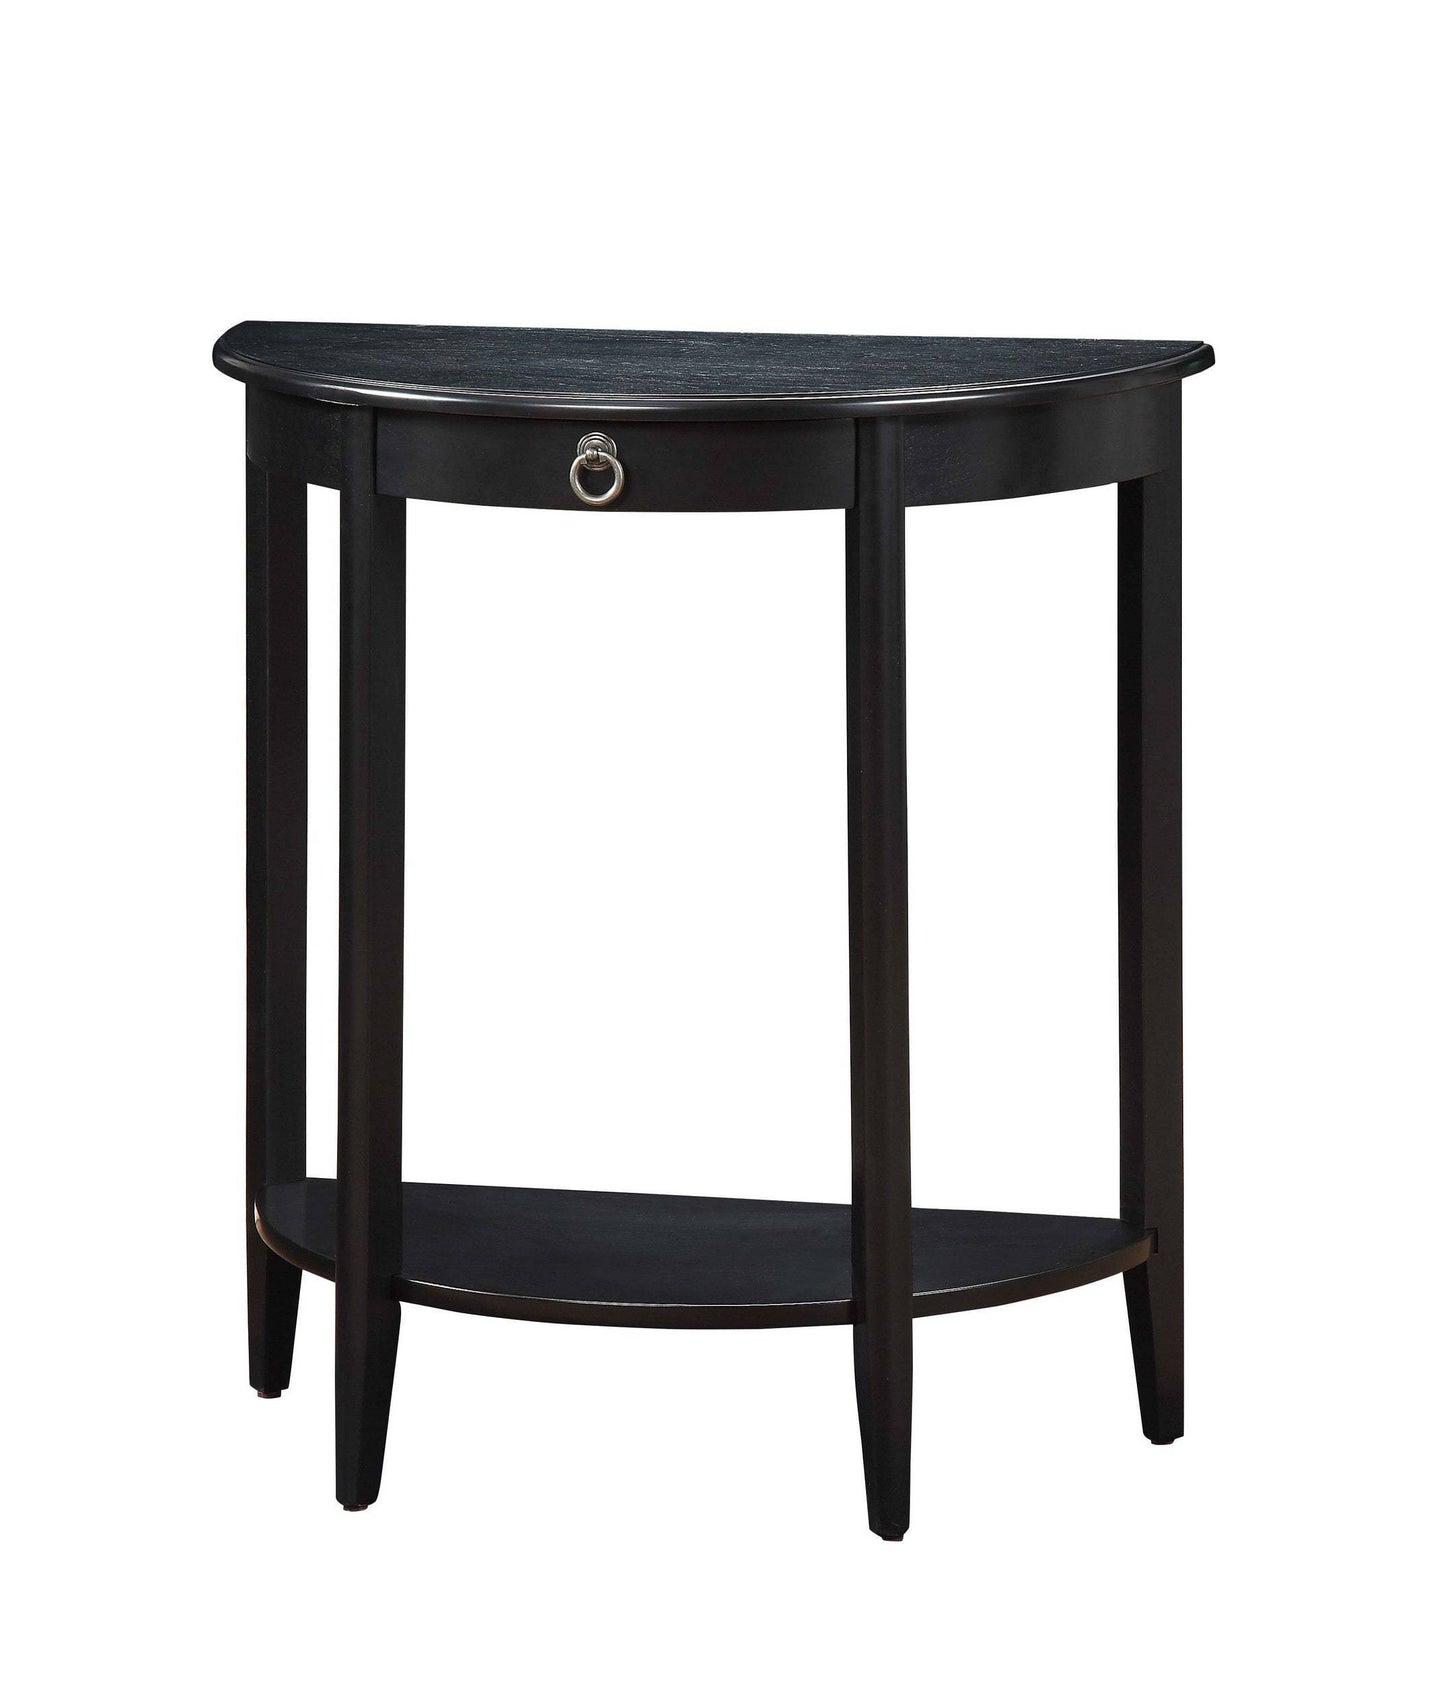 ACME Justino II Console Table in Black